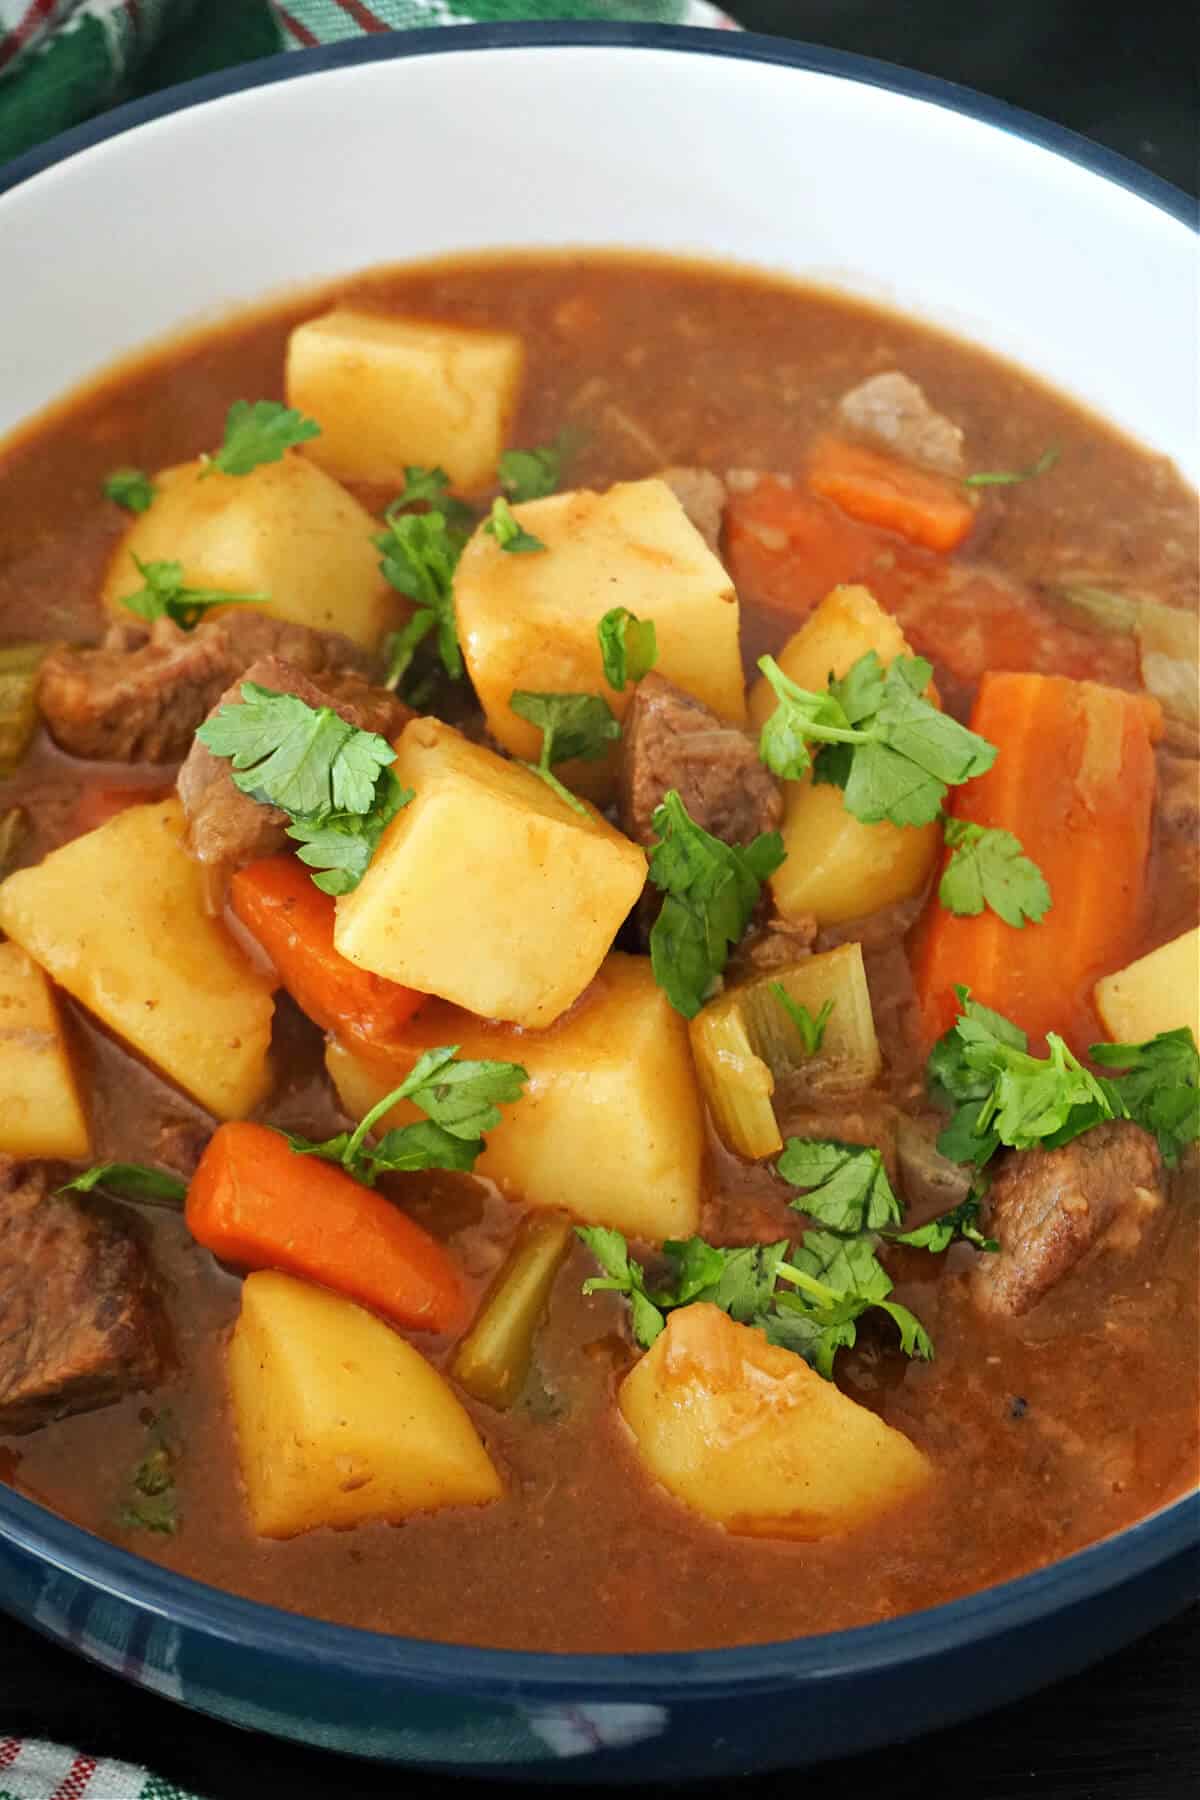 A bowl of beef stew with veggies.